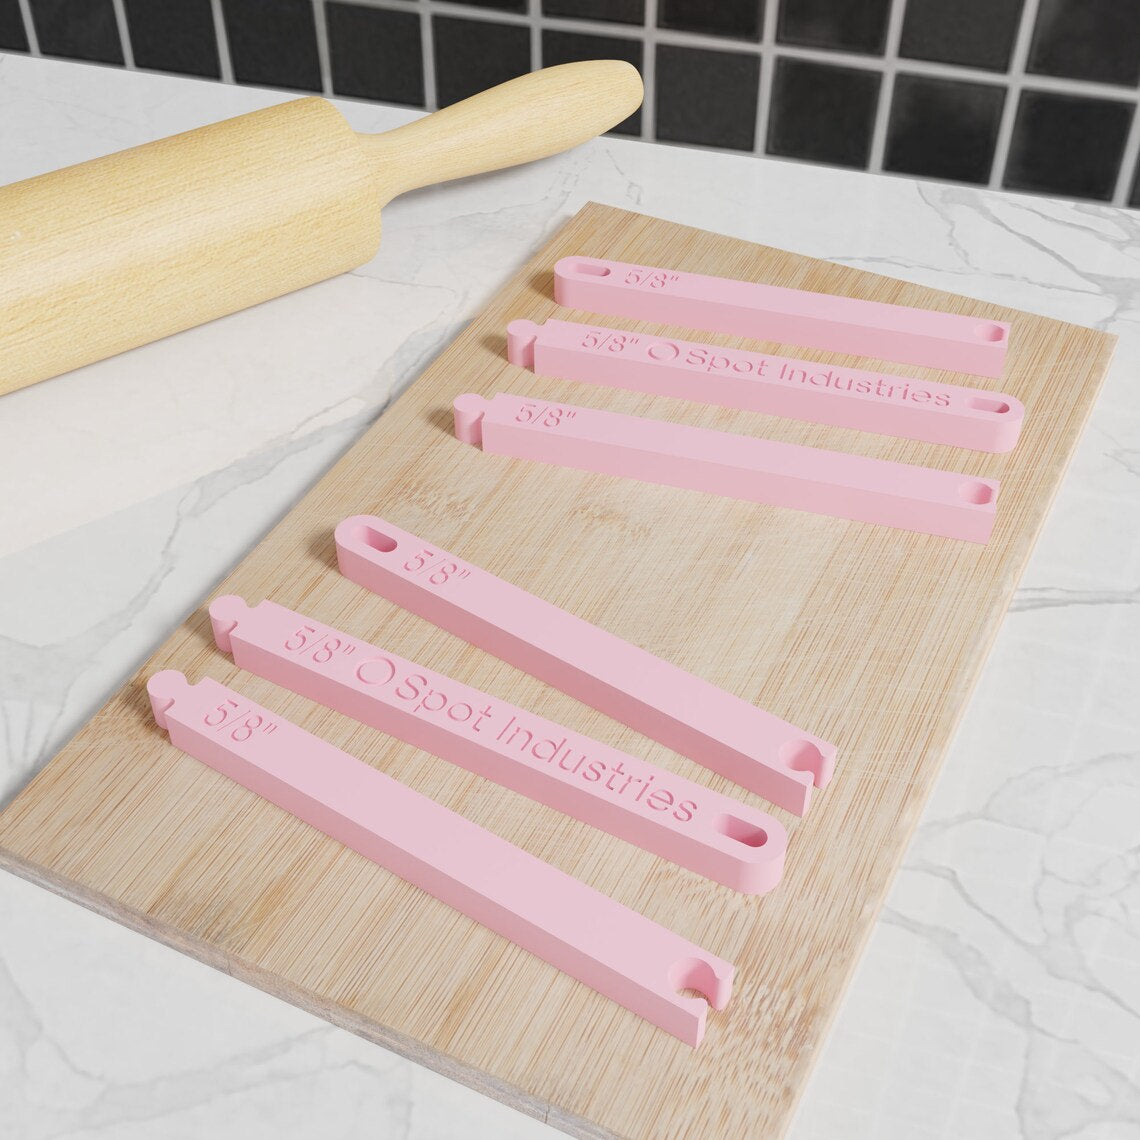 Extra Long Dough Sticks (Metric) in 13mm Thickness. Get The Perfect Dough Height Every Time With Our Extra Long Dough Sticks